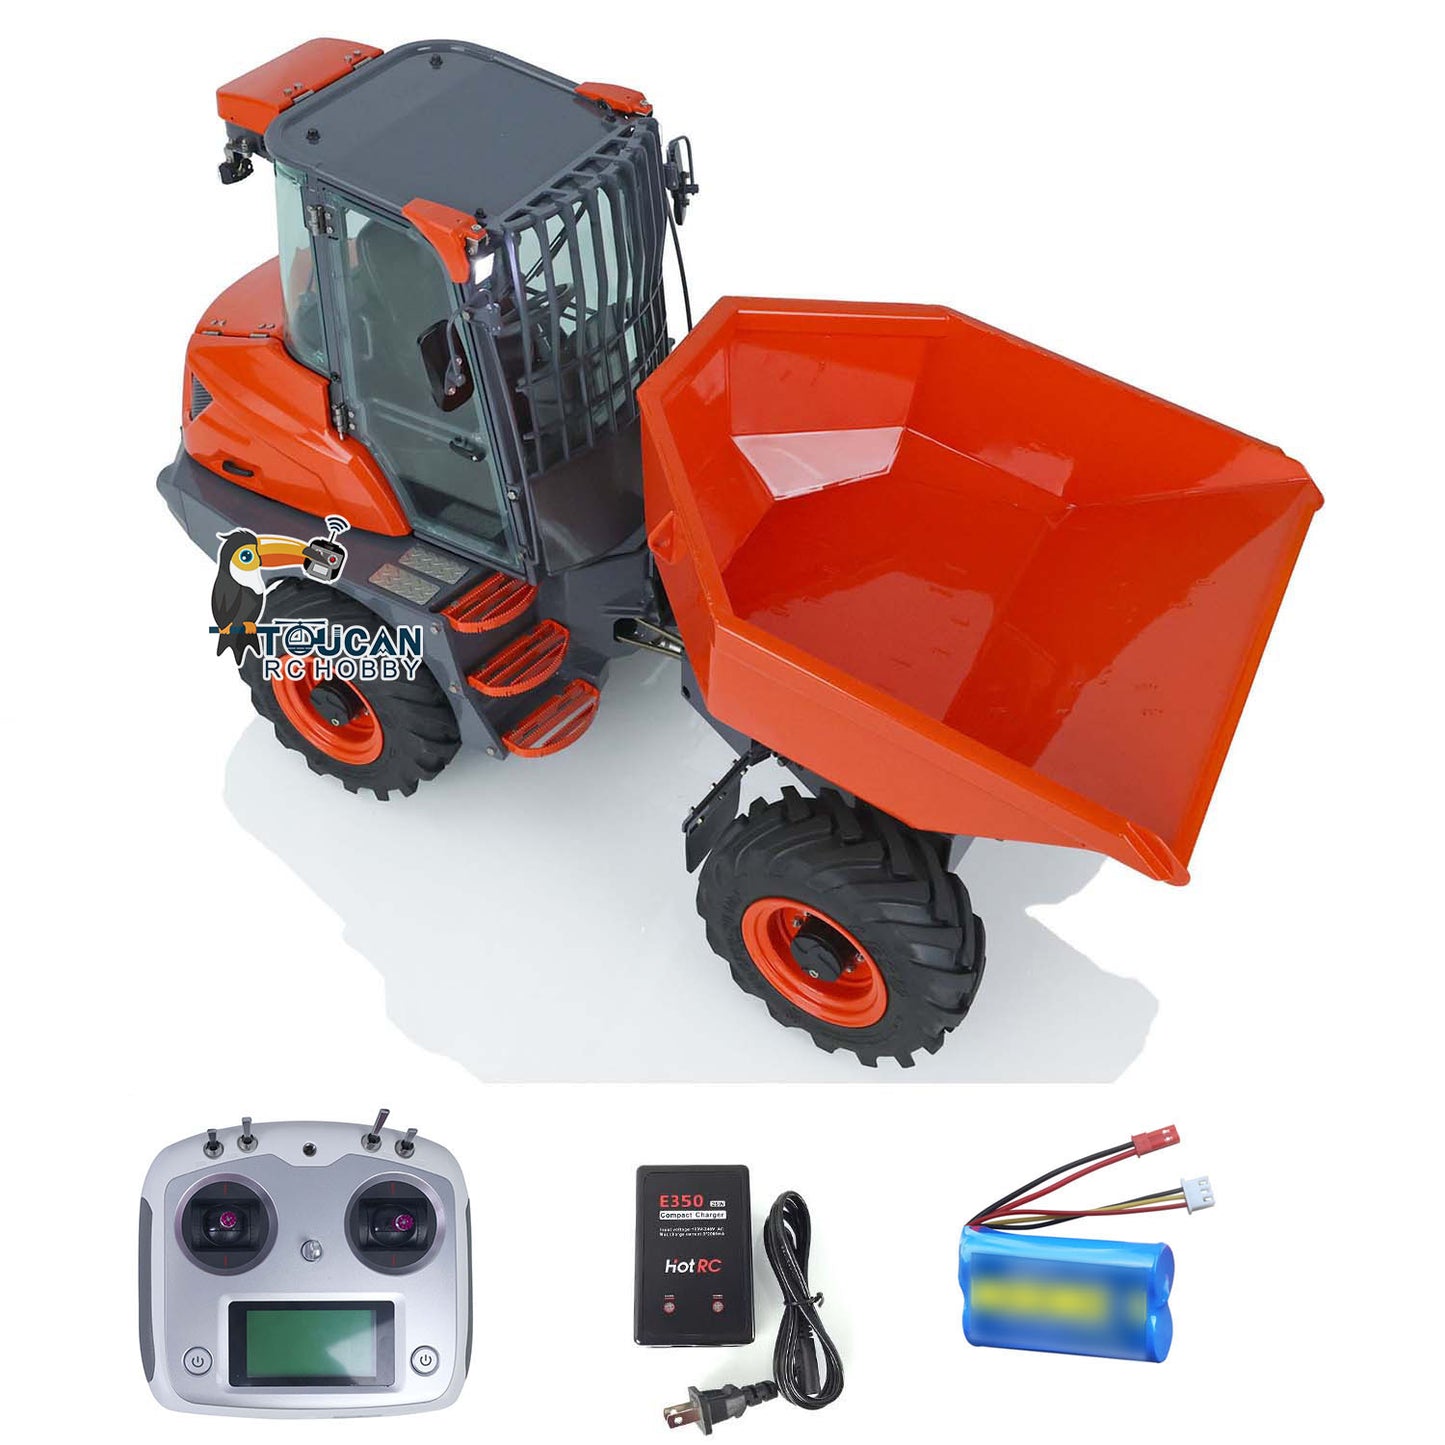 LESU 1/14 Metal Painted RC Remote Controlled Hydraulic Articulated Dumpers AOUE 6MDX Ready To Run Motor ESC Light System